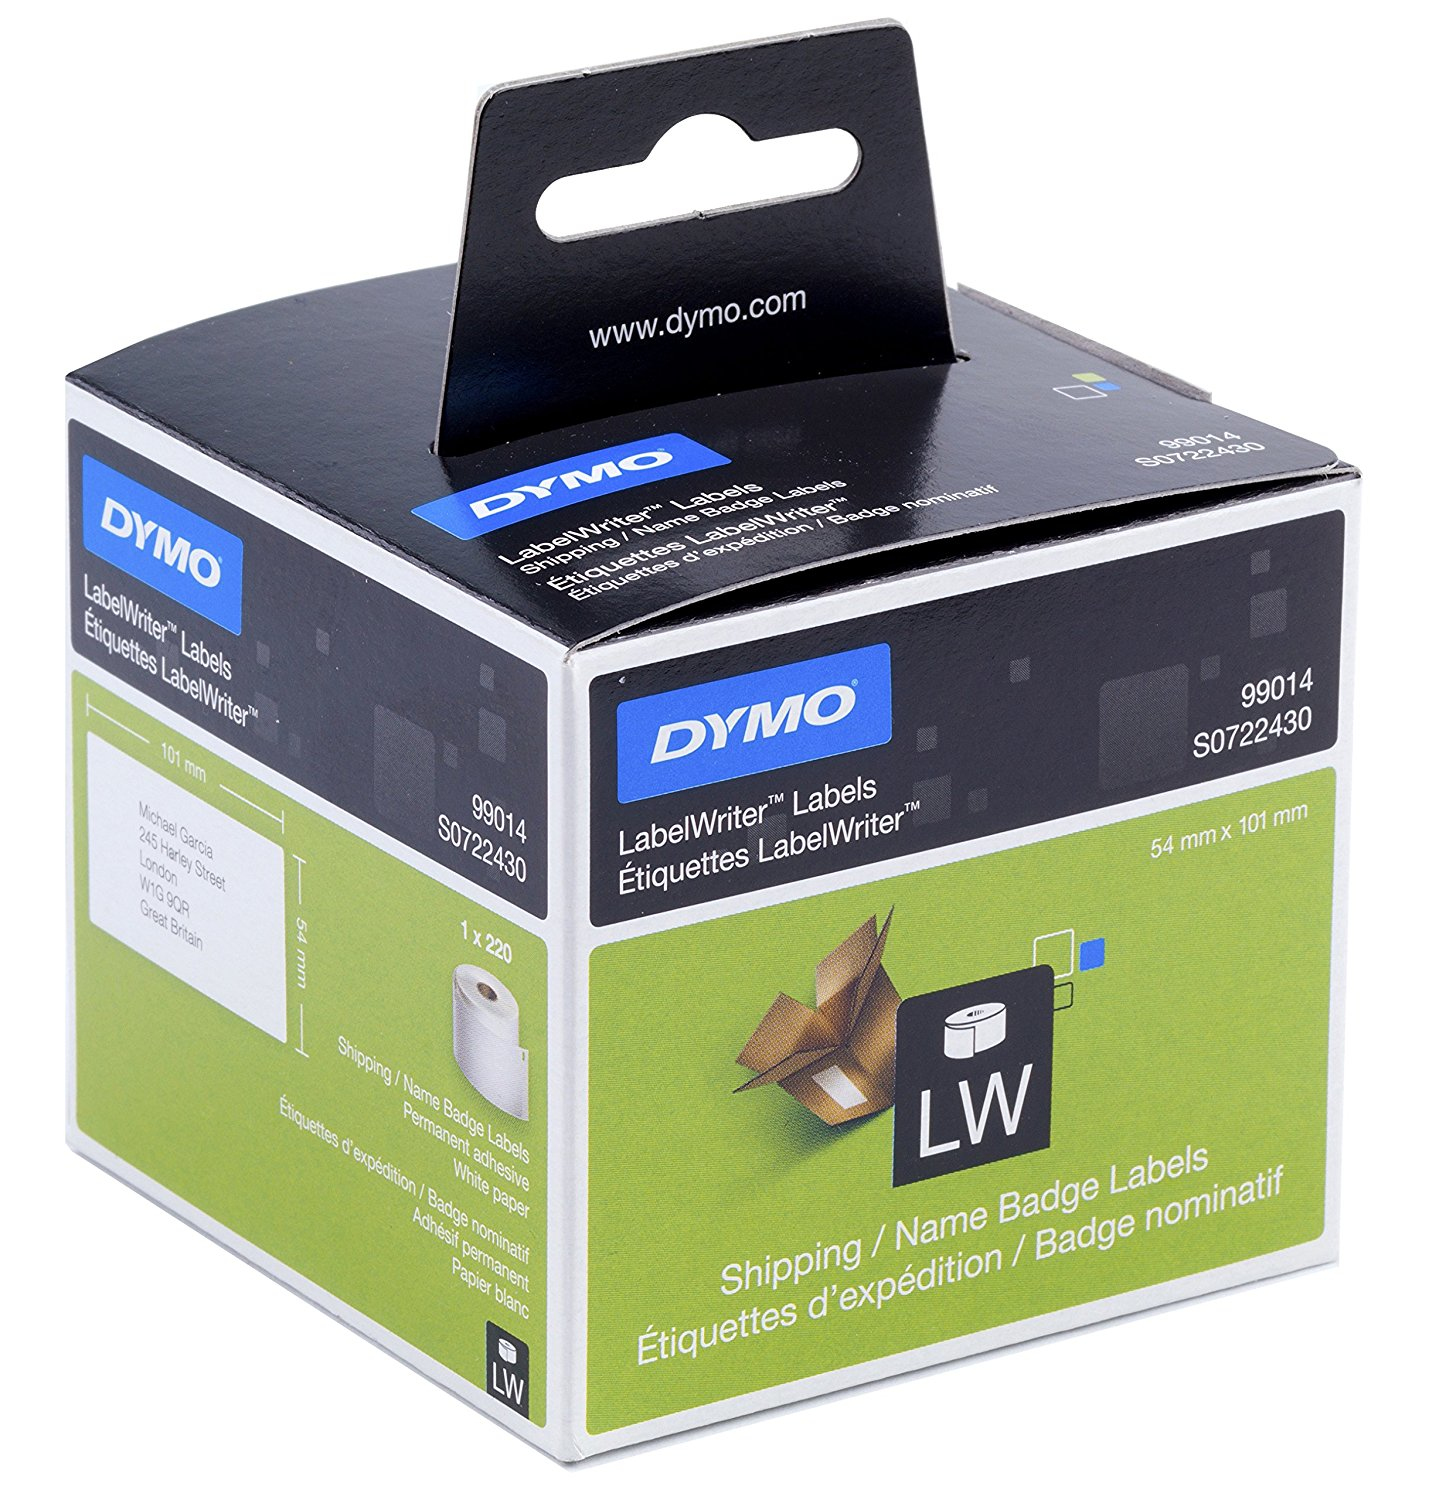 Dymo labels tbv labelwriter shipping/badge 54X101mm (1x220)